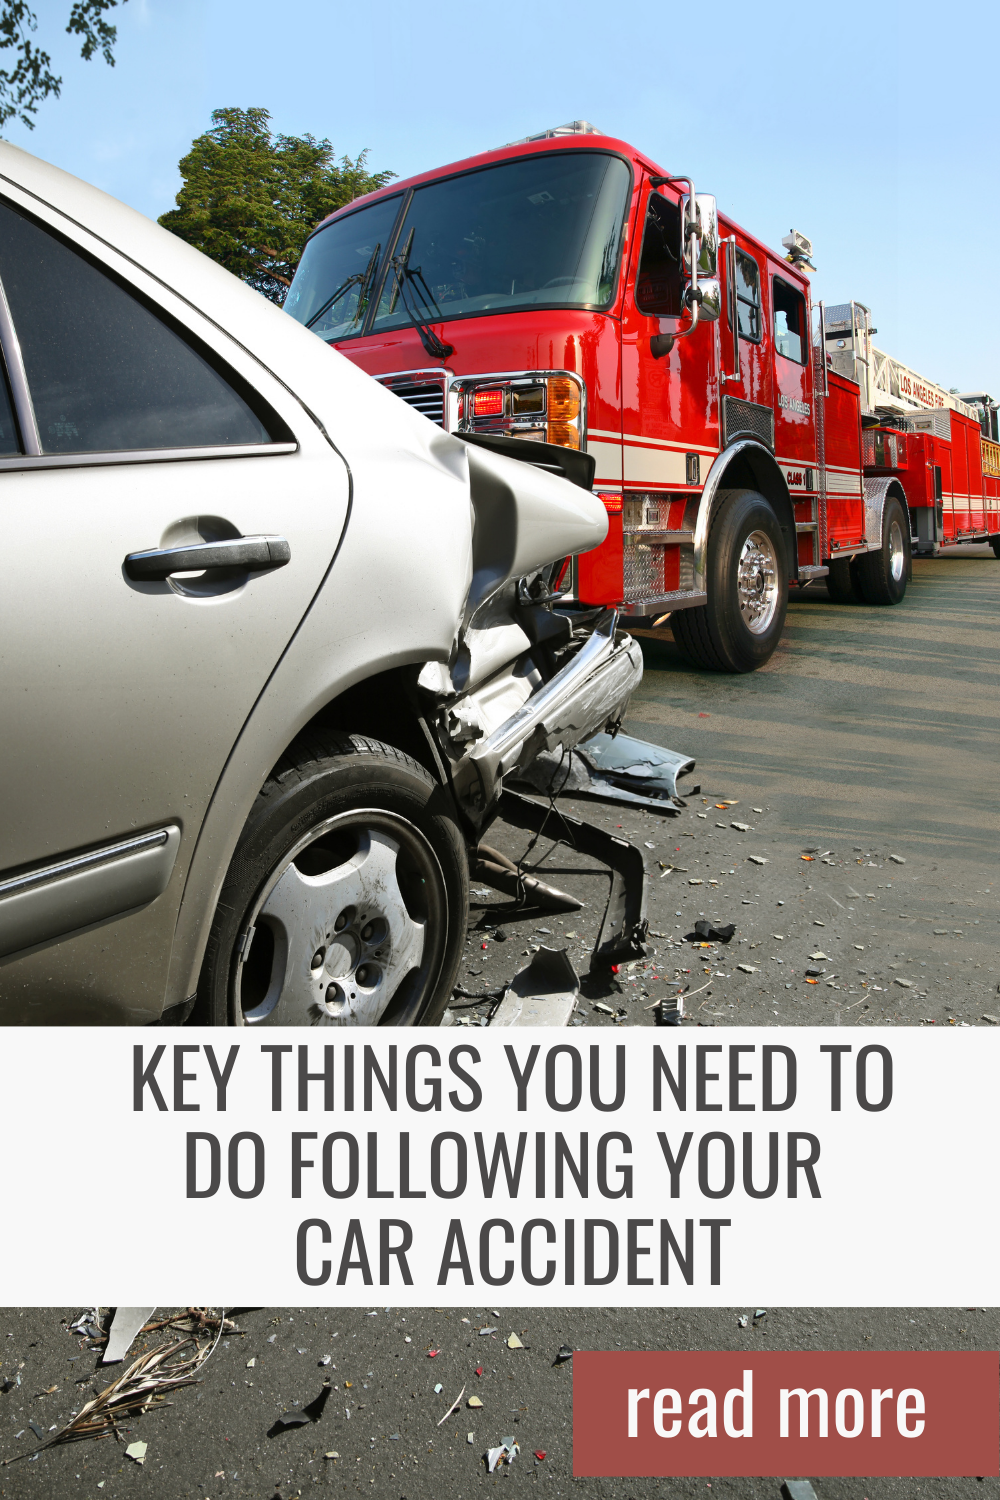 Key Things You Need to do Following Your Car Accident